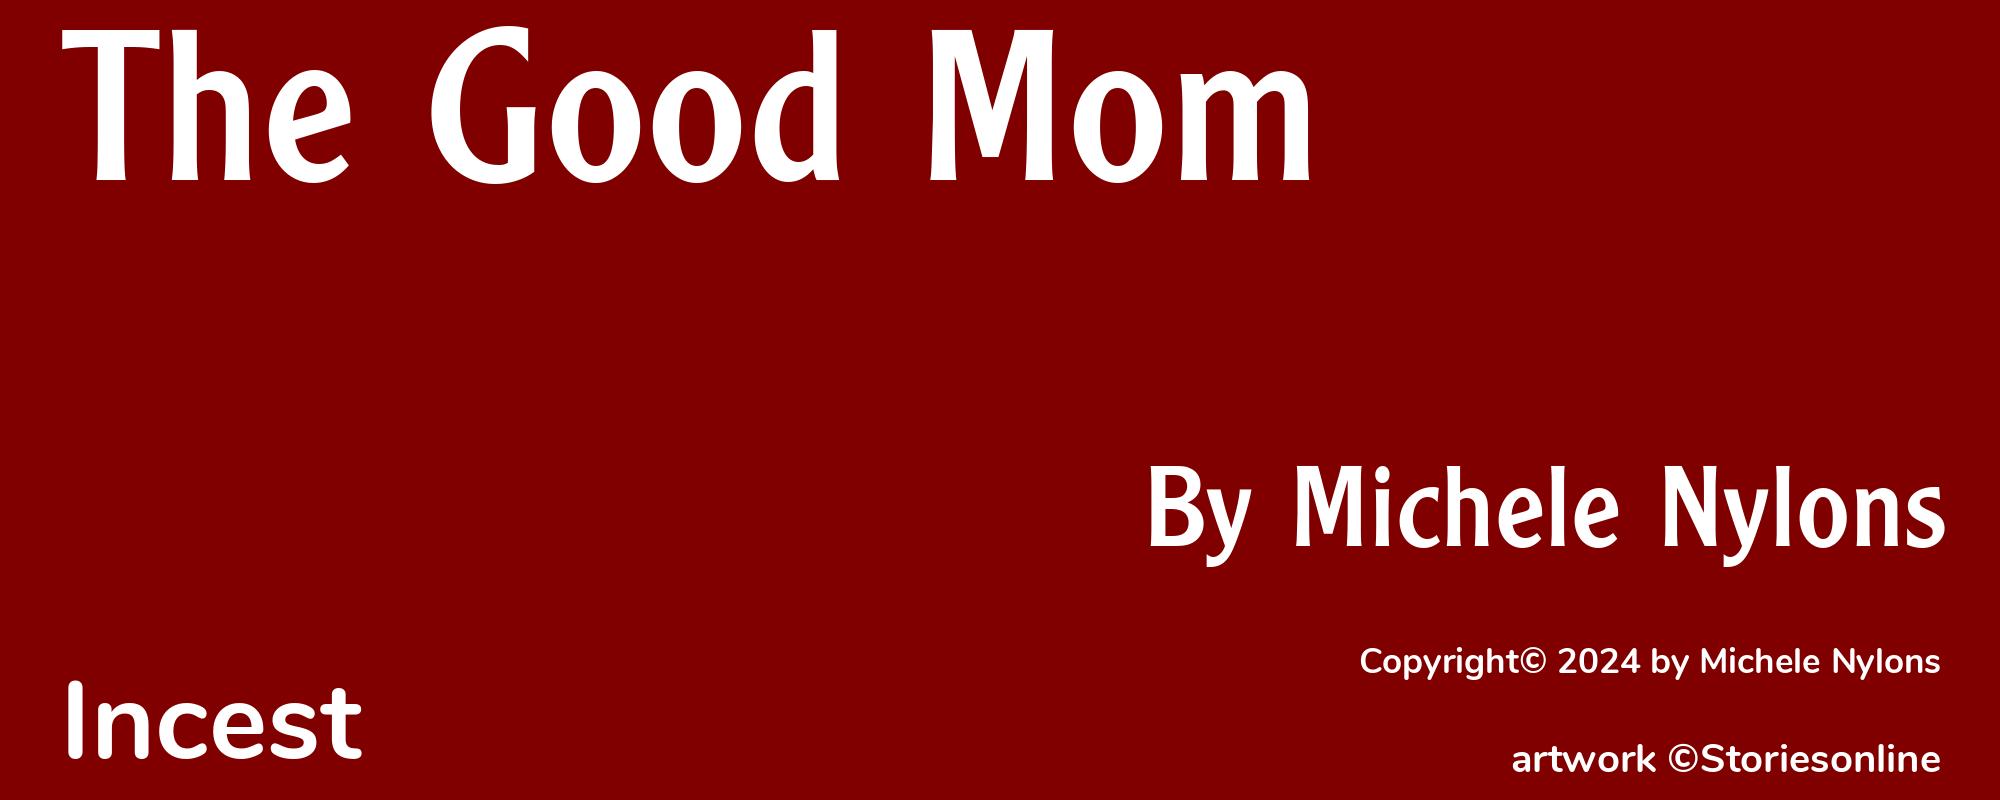 The Good Mom - Cover